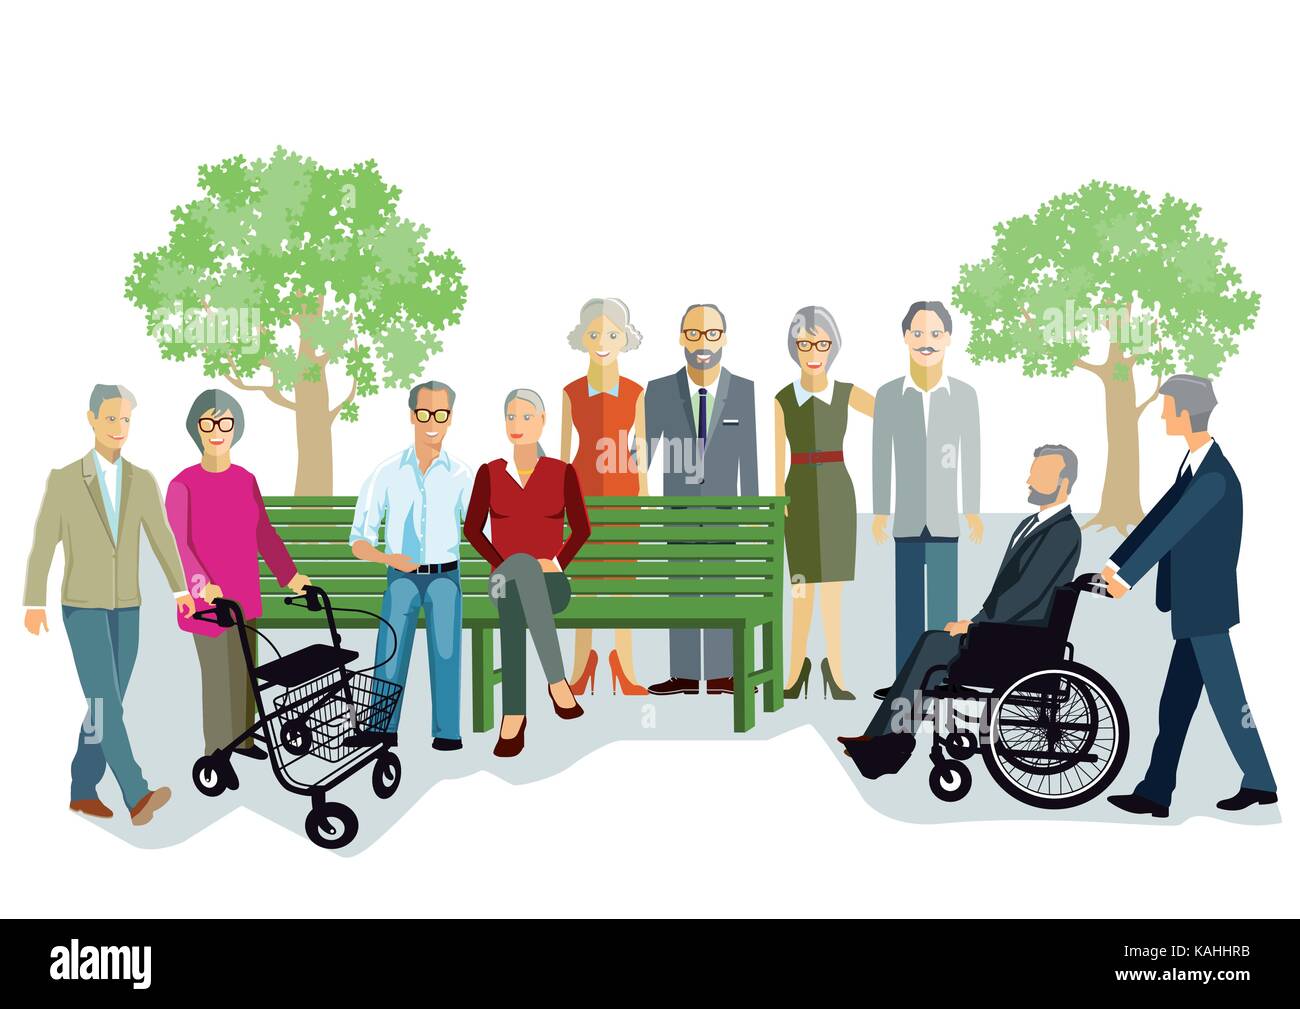 Group of families, Generation together, illustration Stock Vector